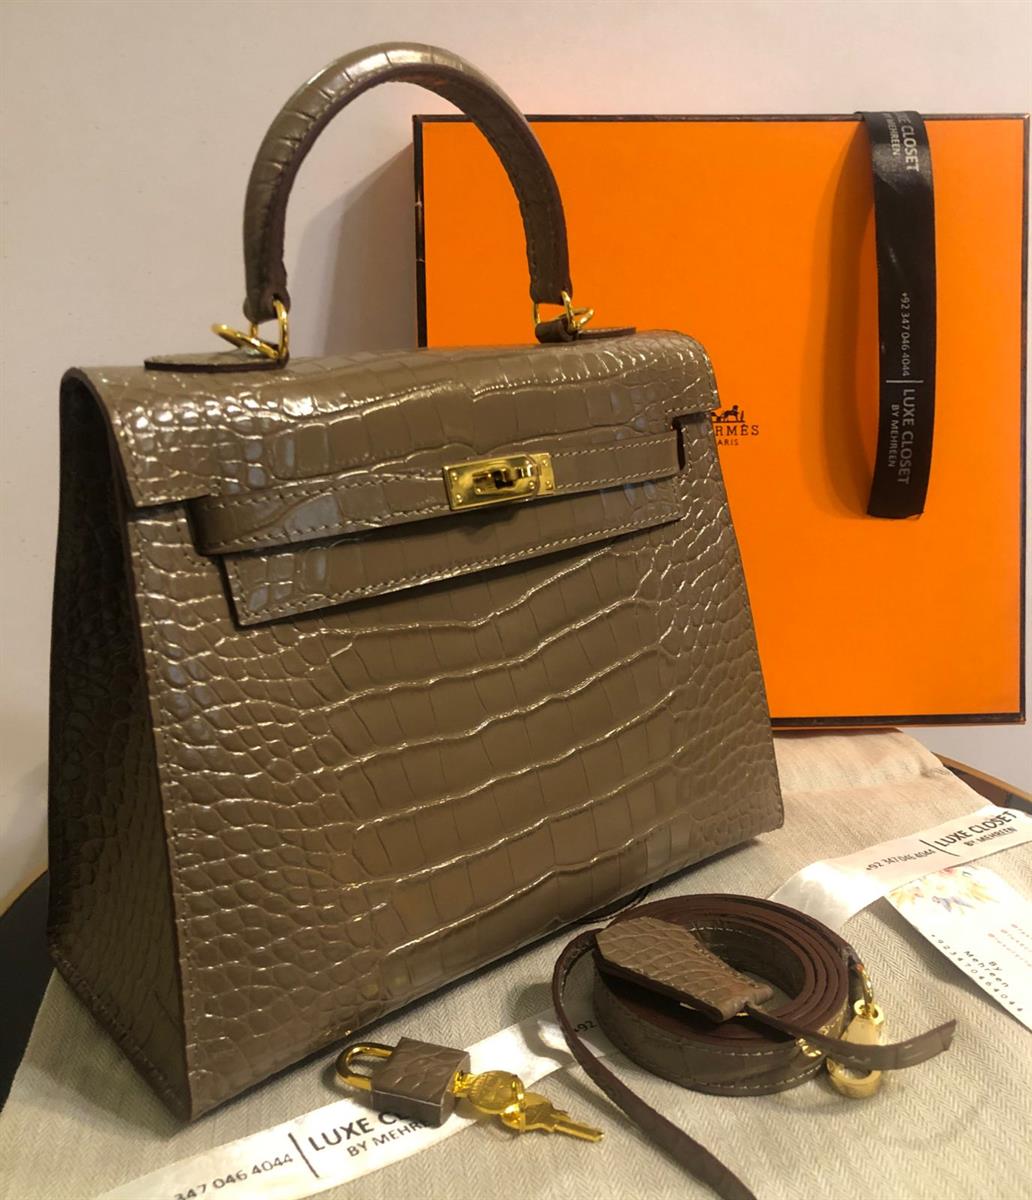 Hermes Kelly 25 Crocodile finish Bag in Pakistan for Rs. 95000.00